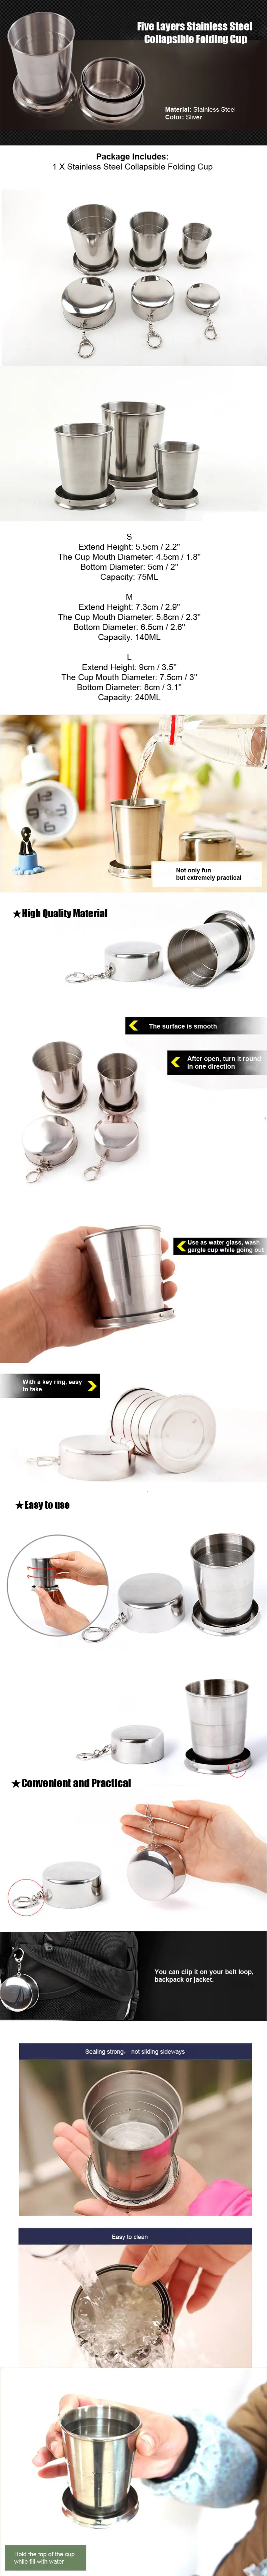 Stainless Steel Collapsible Folding Cup Traveling Outdoor Portable Drinking Cup